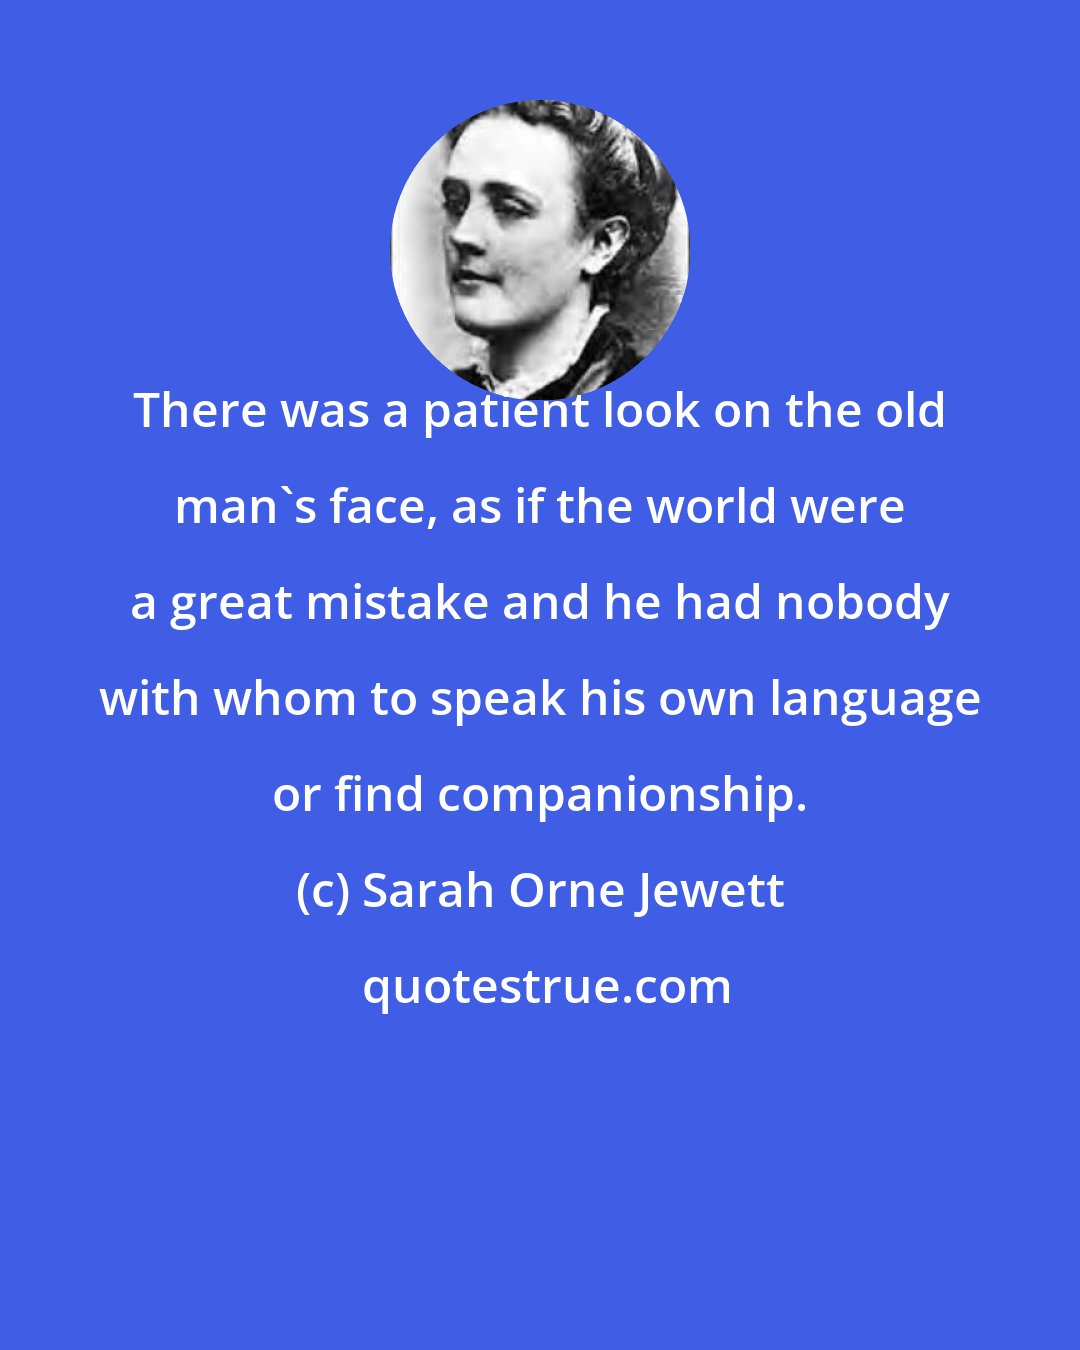 Sarah Orne Jewett: There was a patient look on the old man's face, as if the world were a great mistake and he had nobody with whom to speak his own language or find companionship.